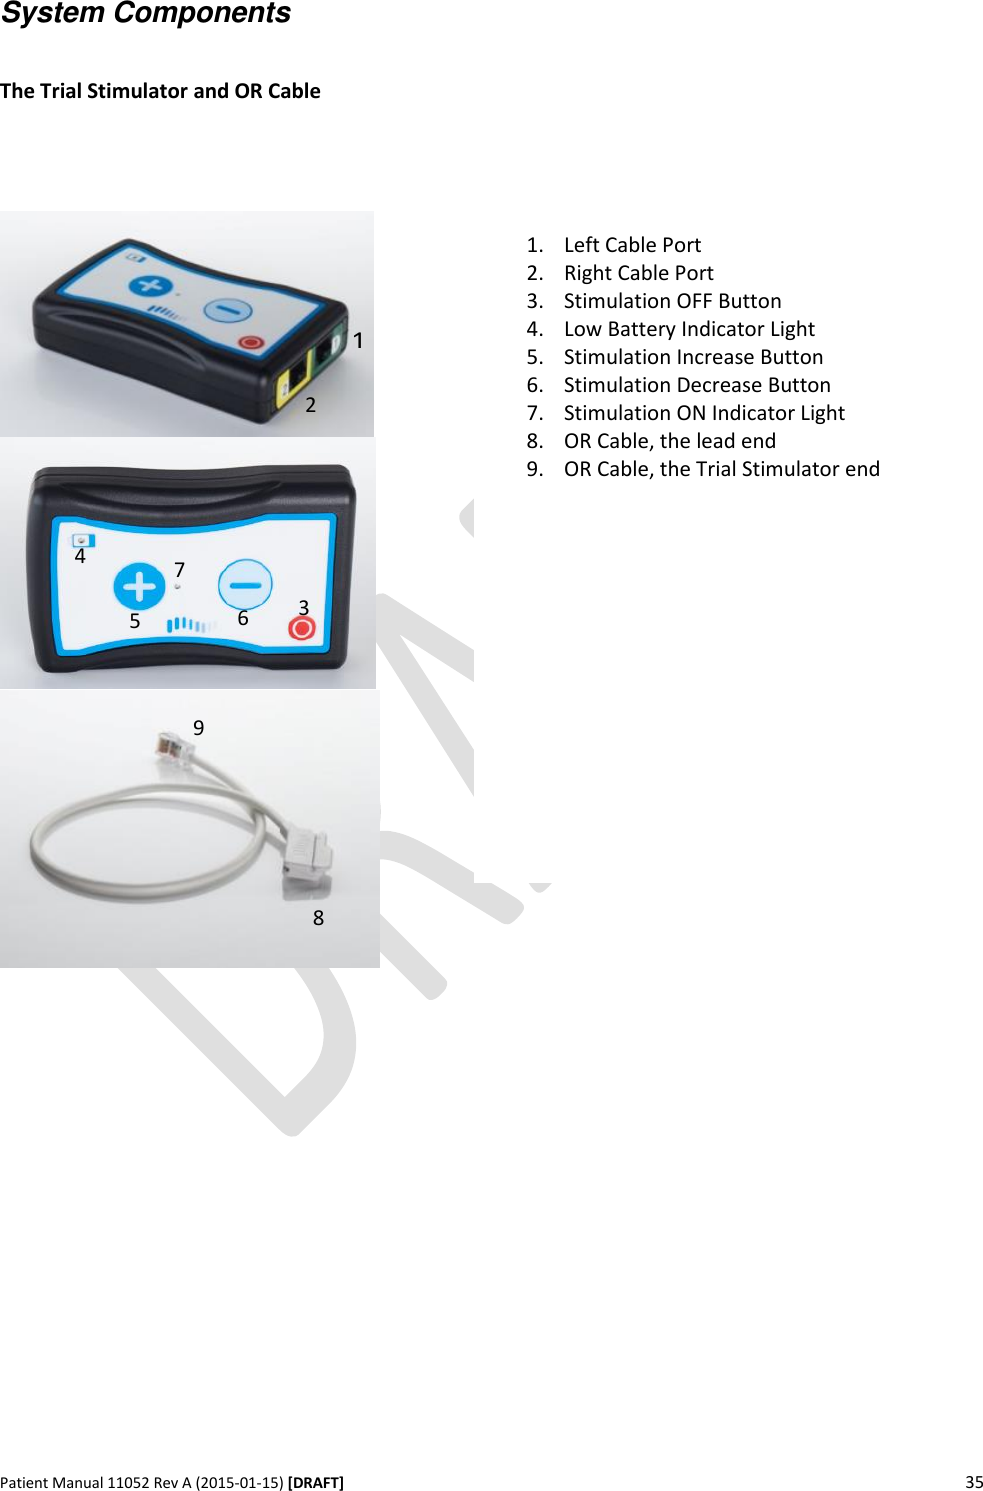      Patient Manual 11052 Rev A (2015-01-15) [DRAFT] 35   System Components  The Trial Stimulator and OR Cable         1 2 3 6 7 5 4 8 9 1. Left Cable Port 2. Right Cable Port 3. Stimulation OFF Button 4. Low Battery Indicator Light 5. Stimulation Increase Button 6. Stimulation Decrease Button 7. Stimulation ON Indicator Light 8. OR Cable, the lead end 9. OR Cable, the Trial Stimulator end 